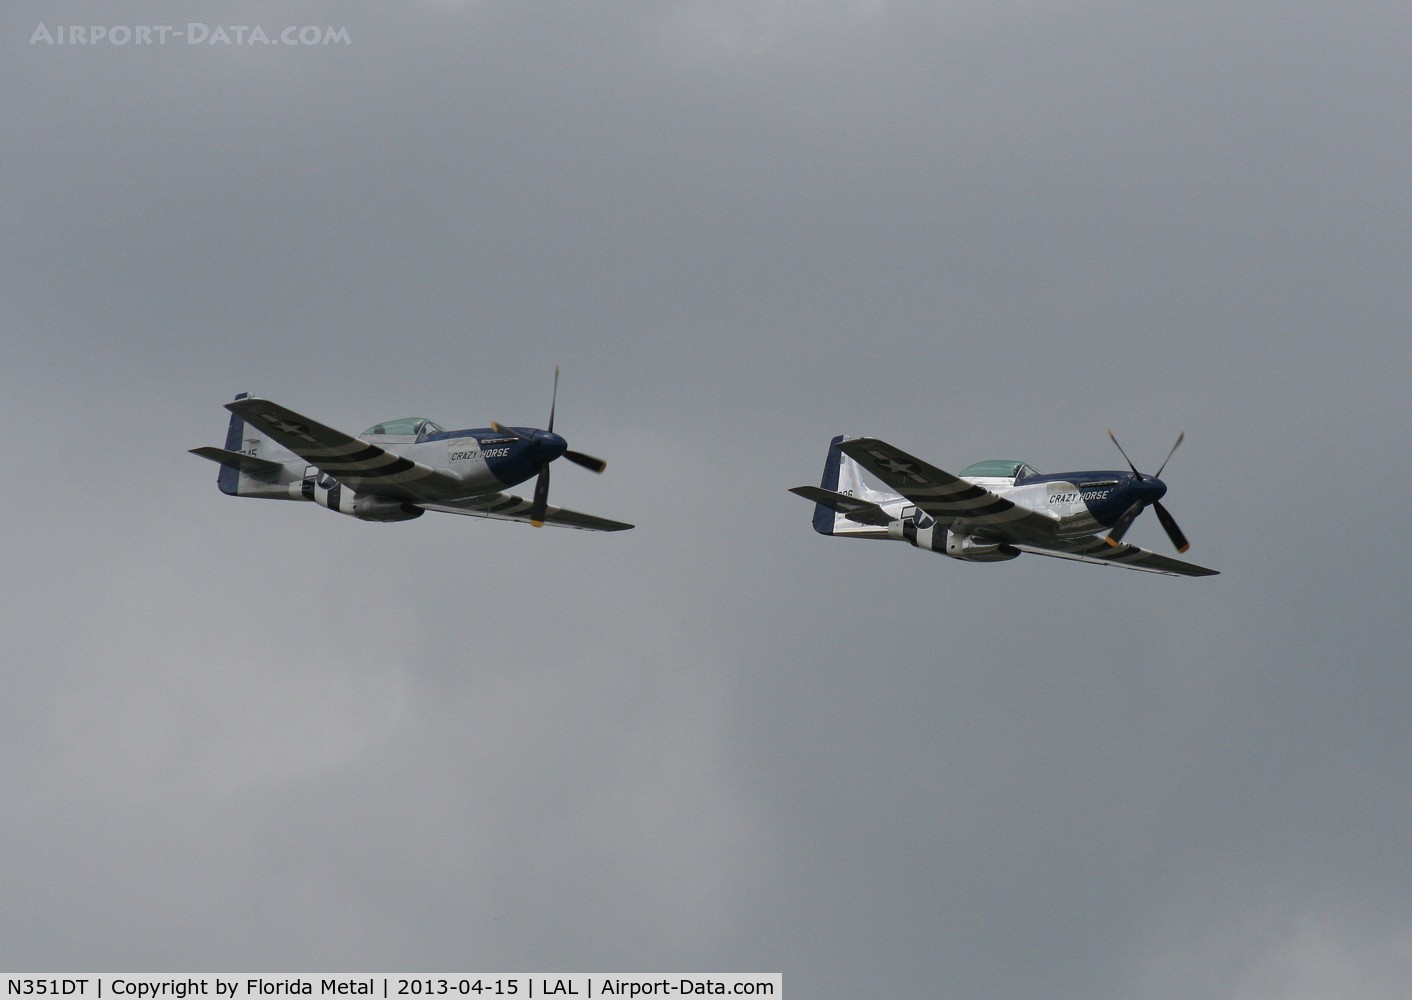 N351DT, 1944 North American P-51D Mustang C/N 122-41042, Crazy Horse 2 and Crazy Horse fly by at Sun N Fun